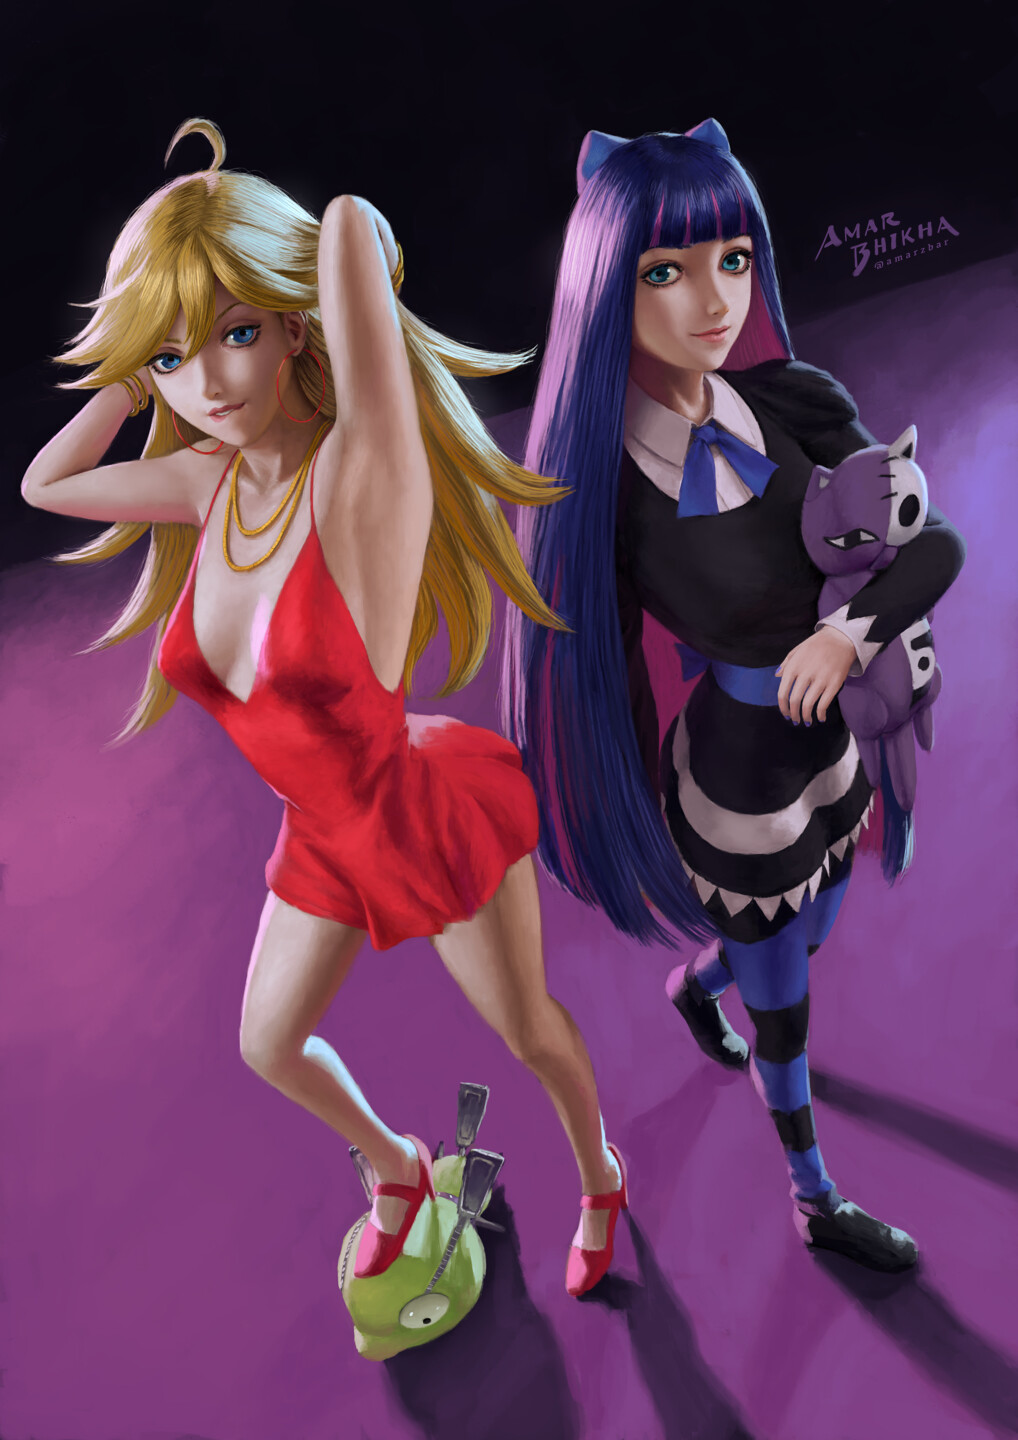 Panty you i and stocking want Stalking Geek